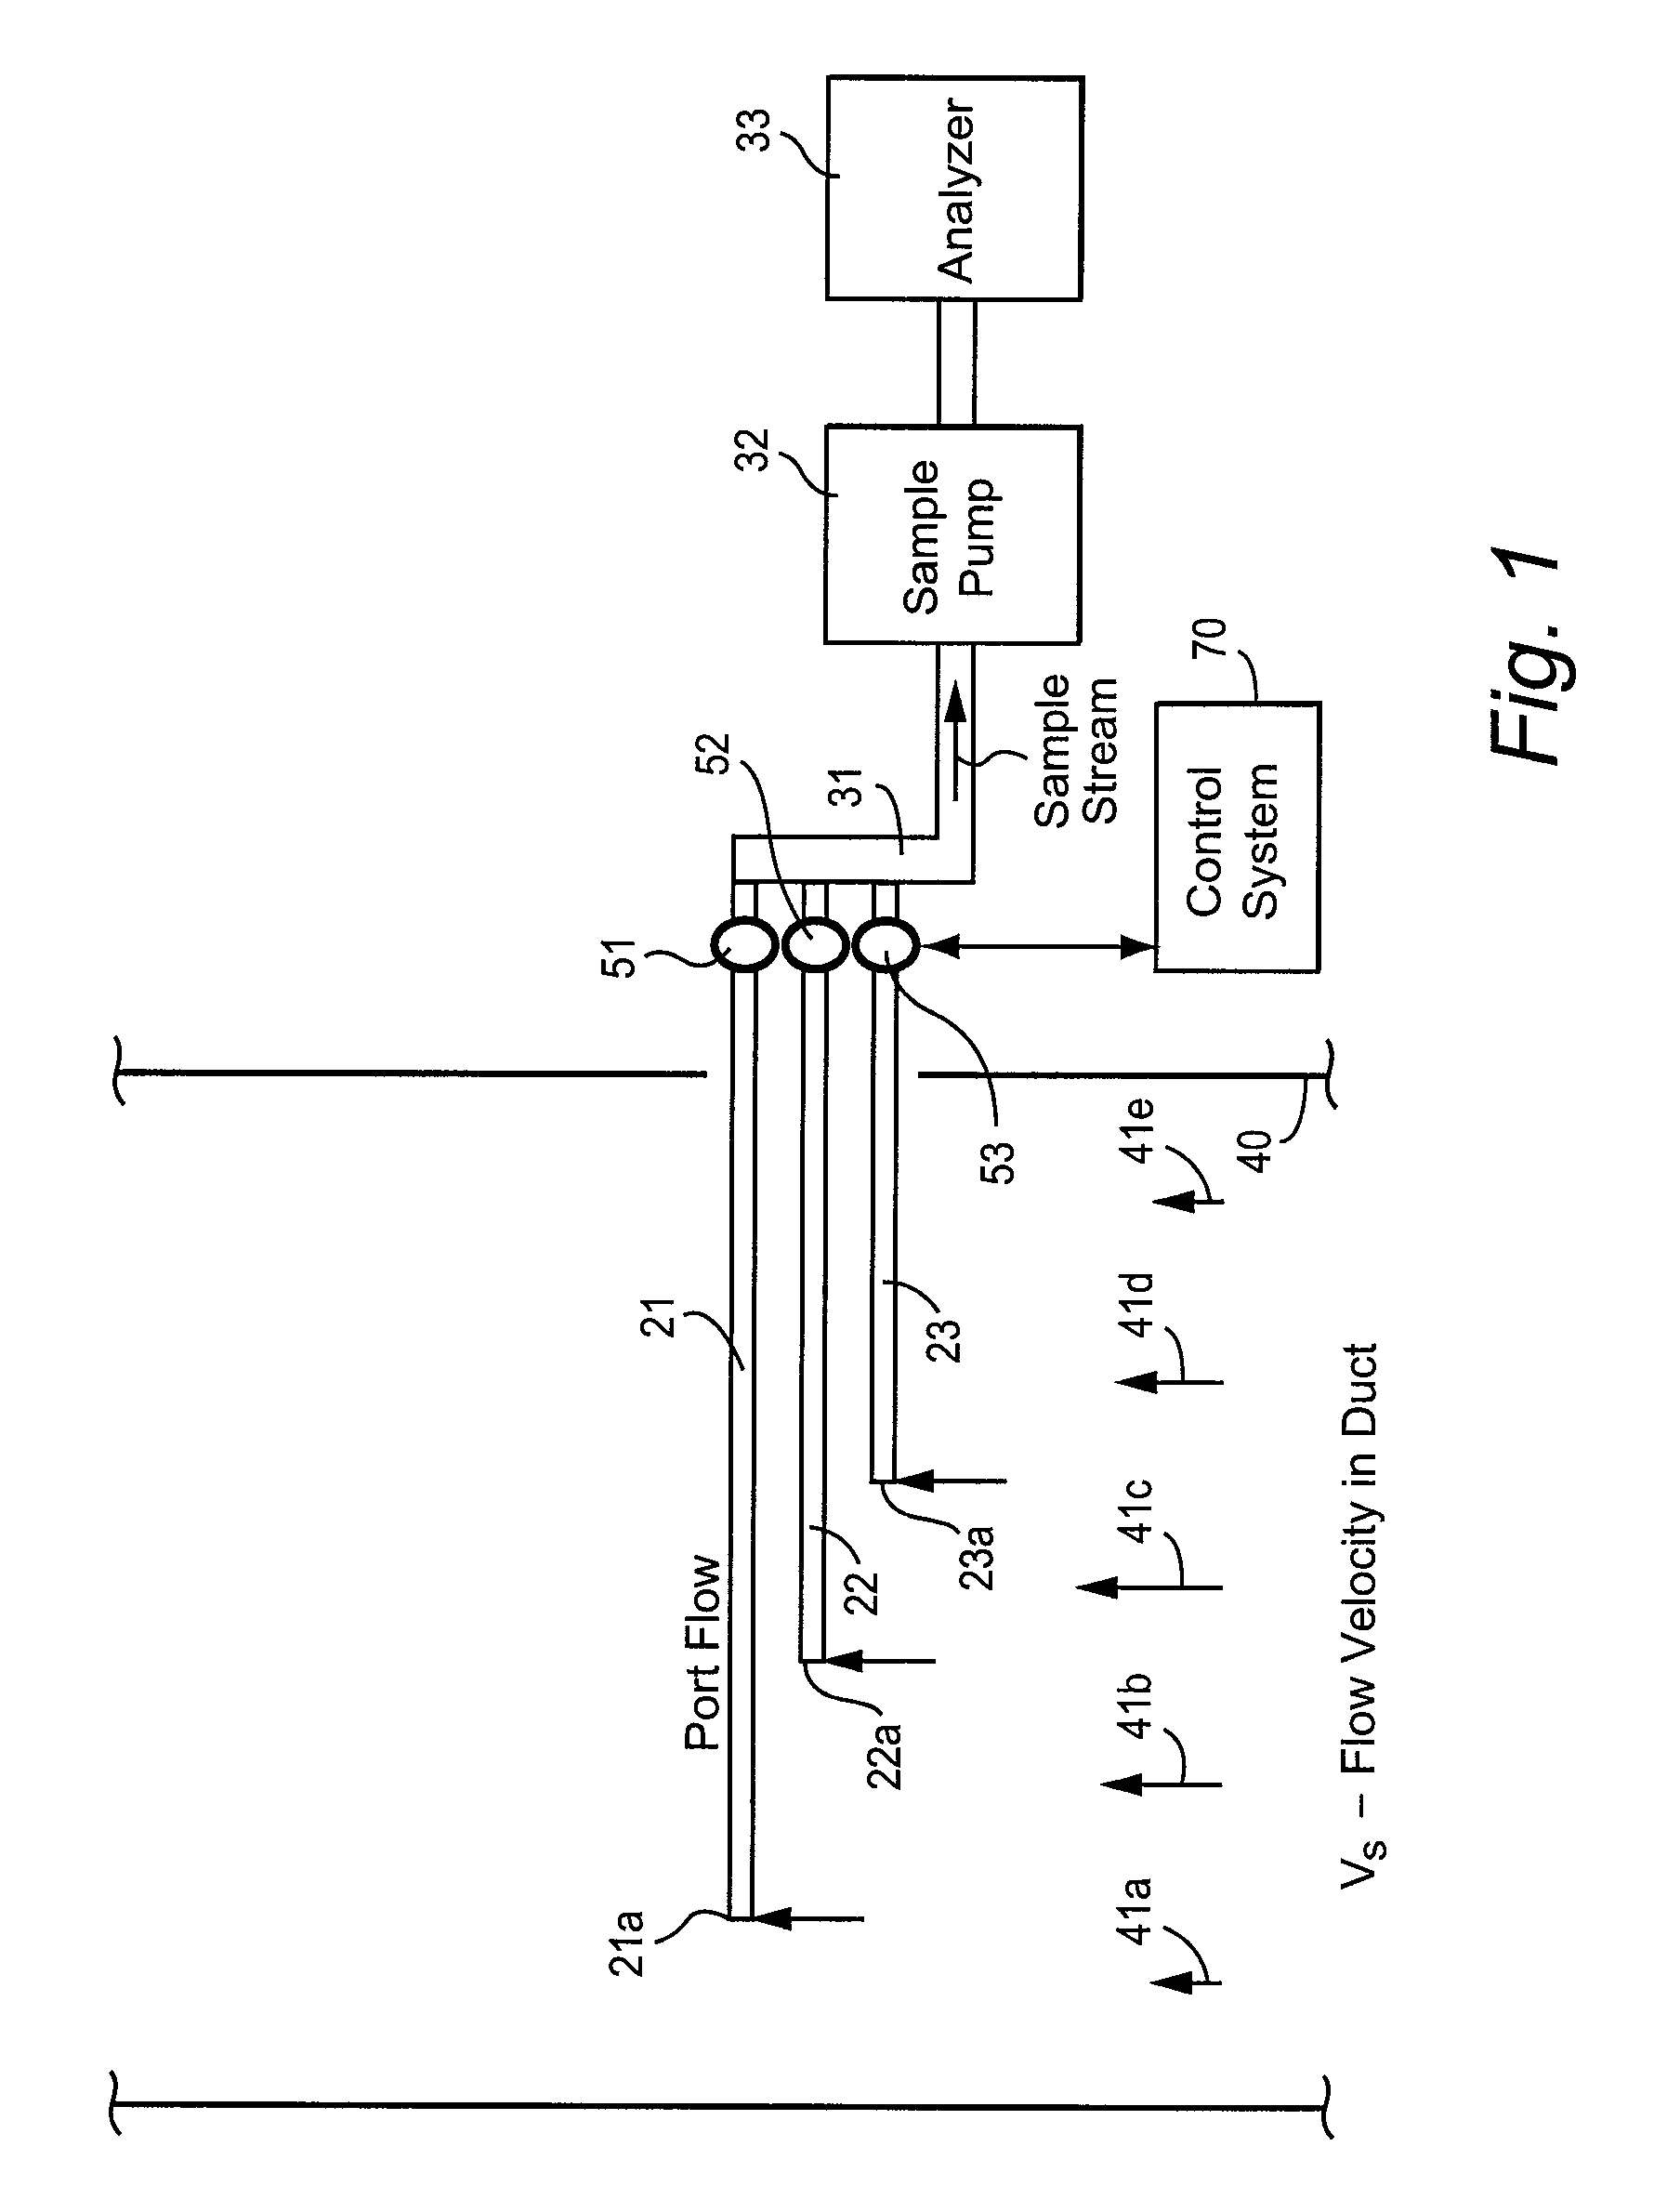 Configurable multi-point sampling method and system for representative gas composition measurements in a stratified gas flow stream